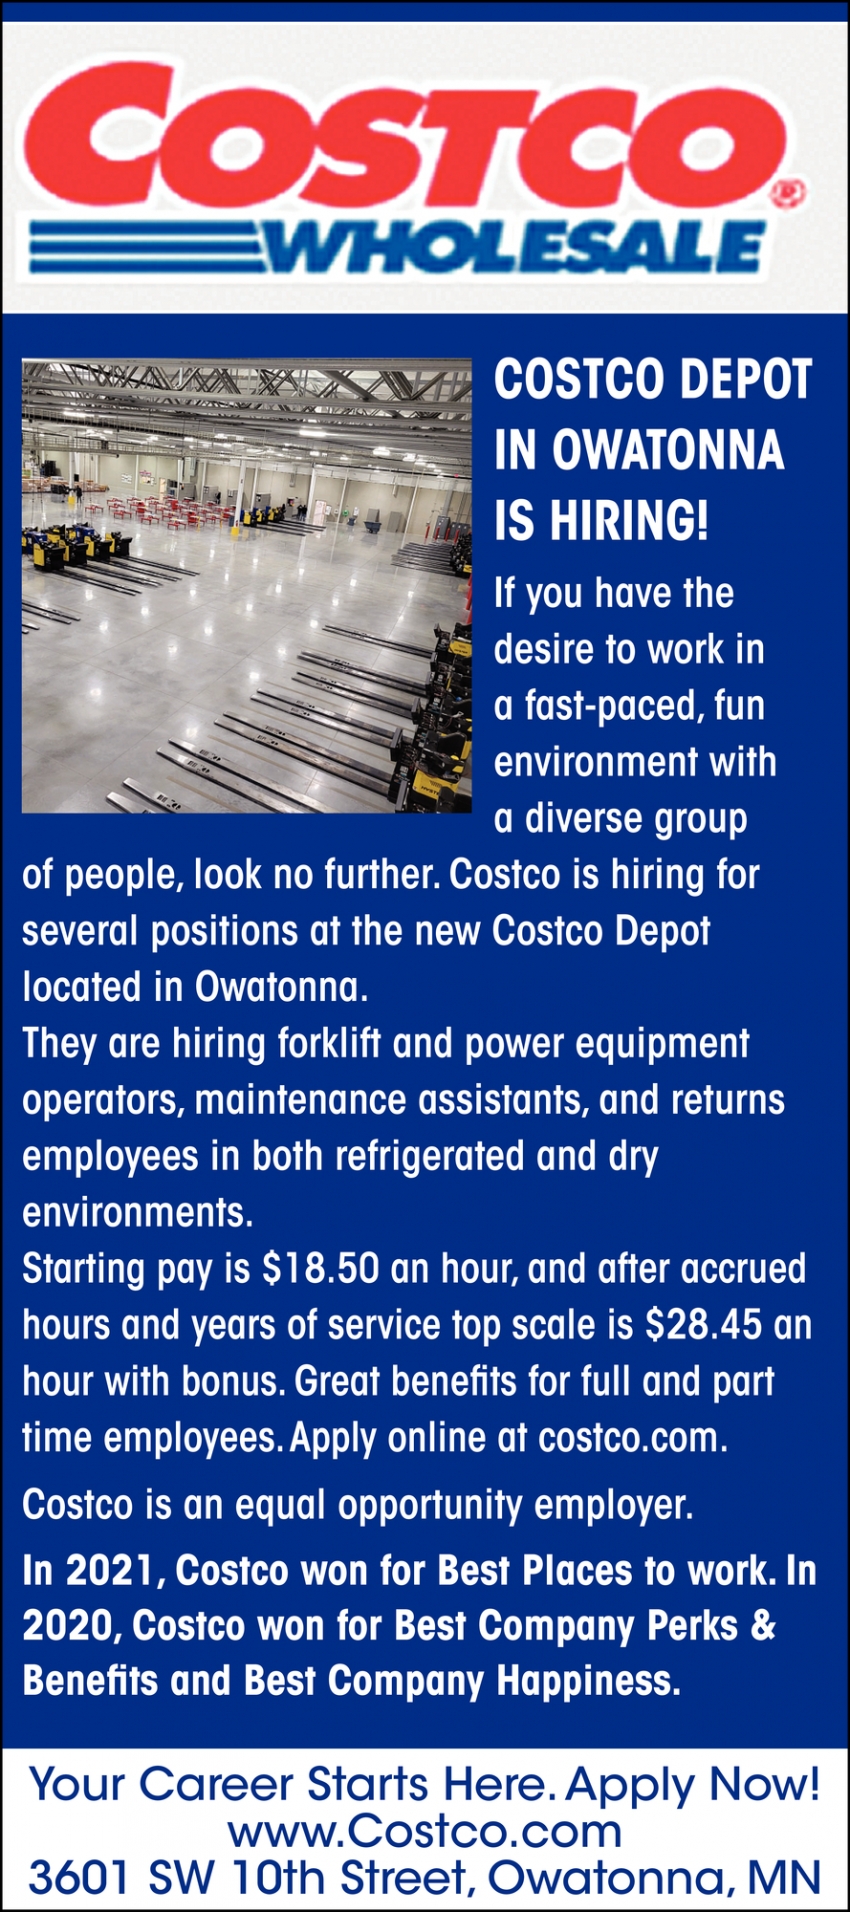 Cotsco Depot in Owatonna Is Hiring!